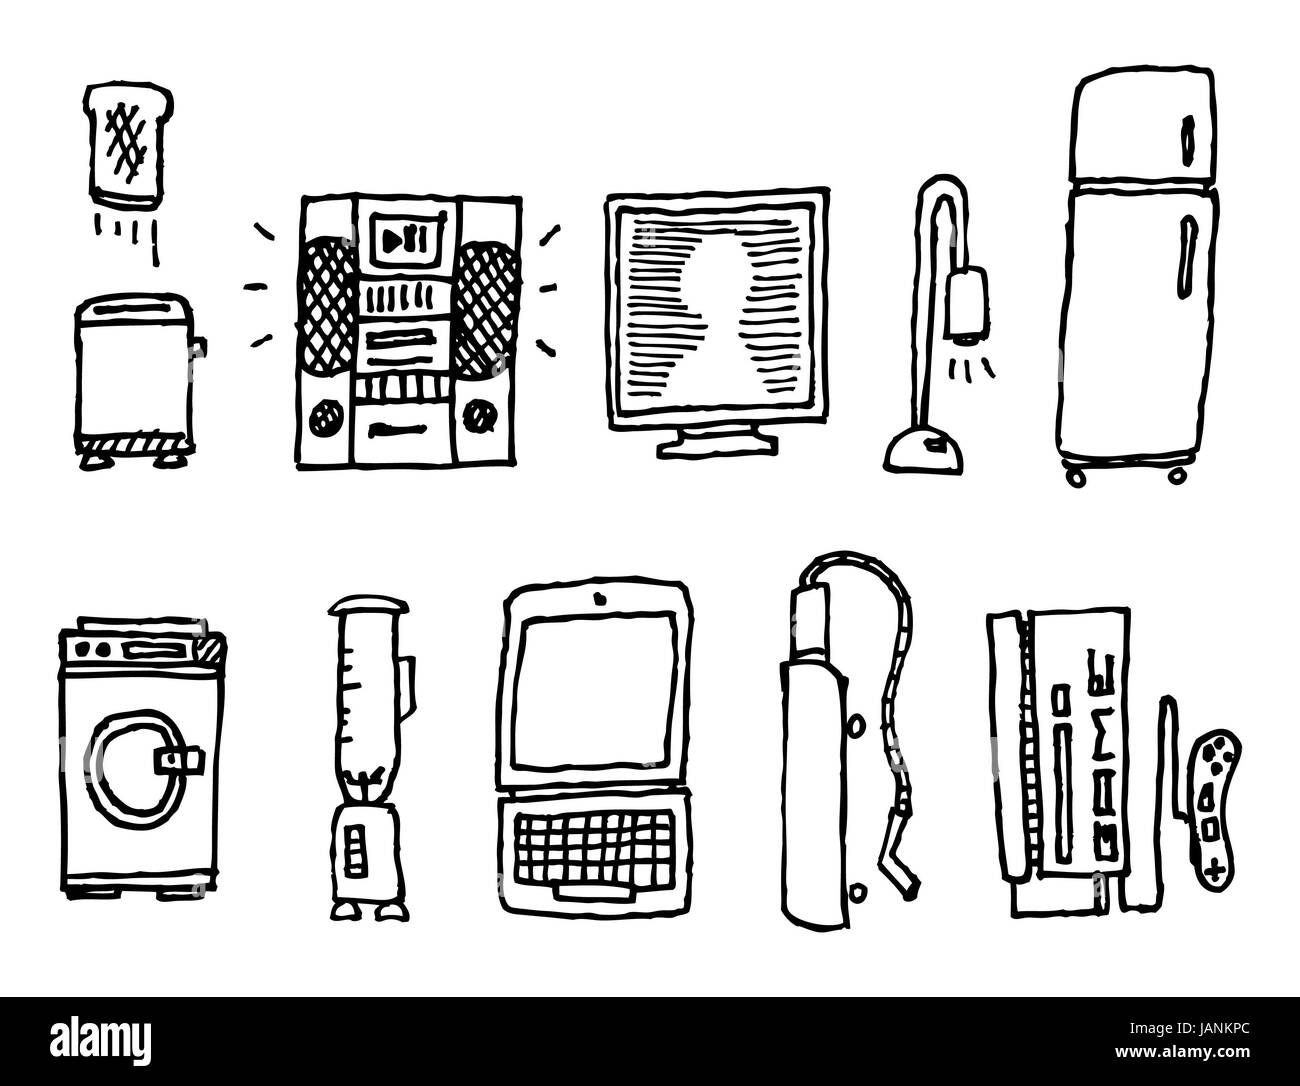 Vector hand-drawn home appliances Stock Photo